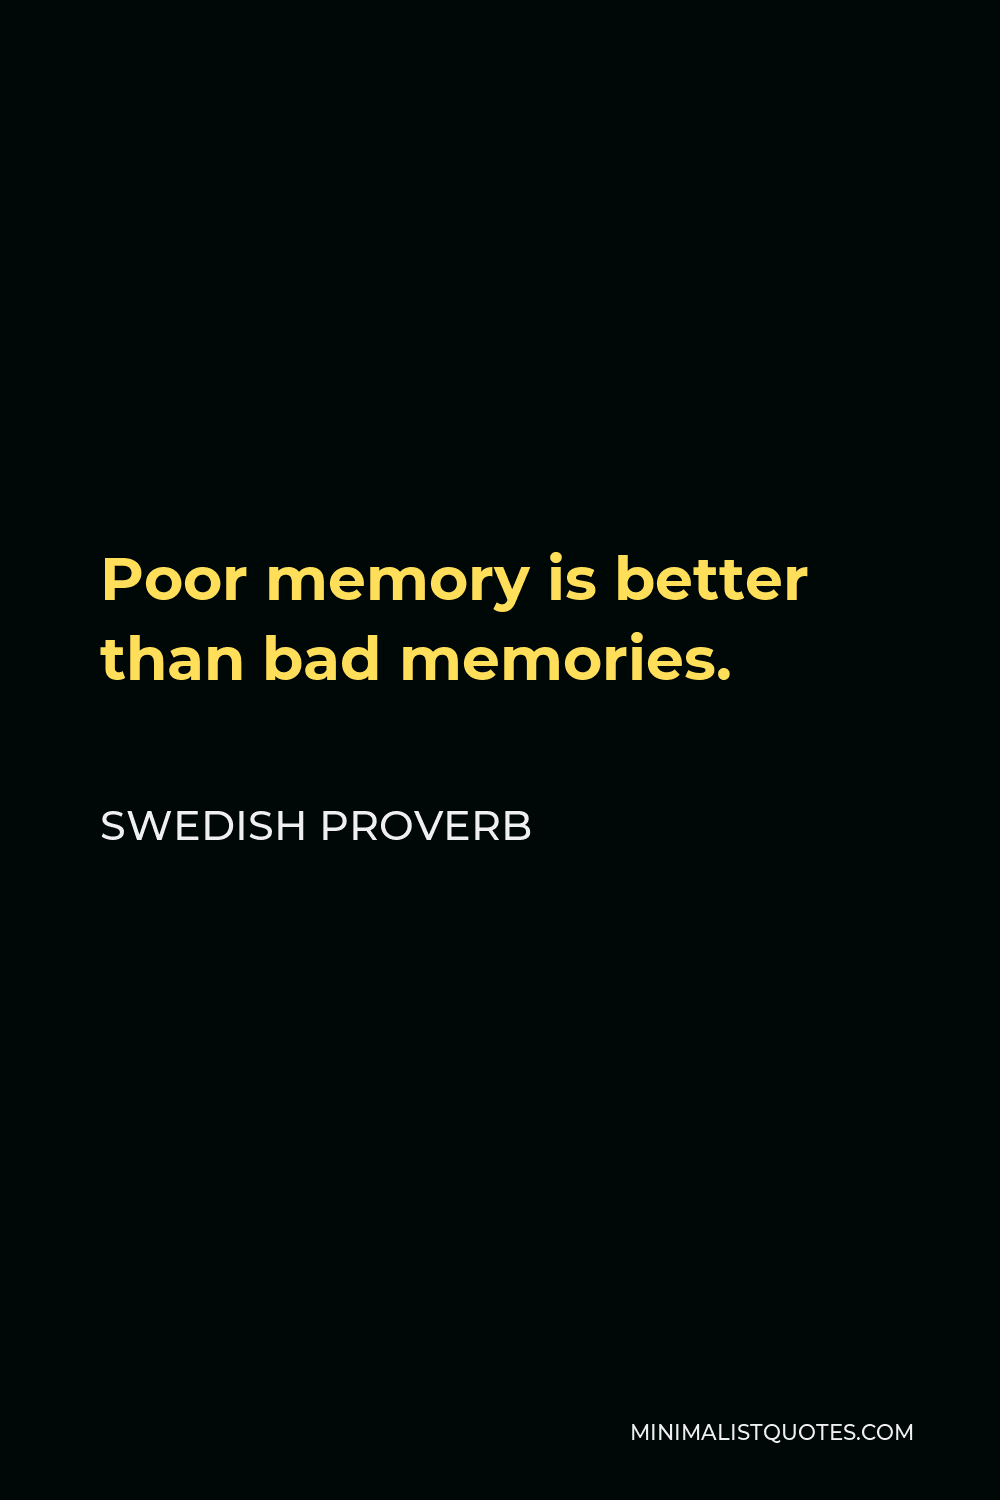 Swedish Proverb Quote - Poor memory is better than bad memories.